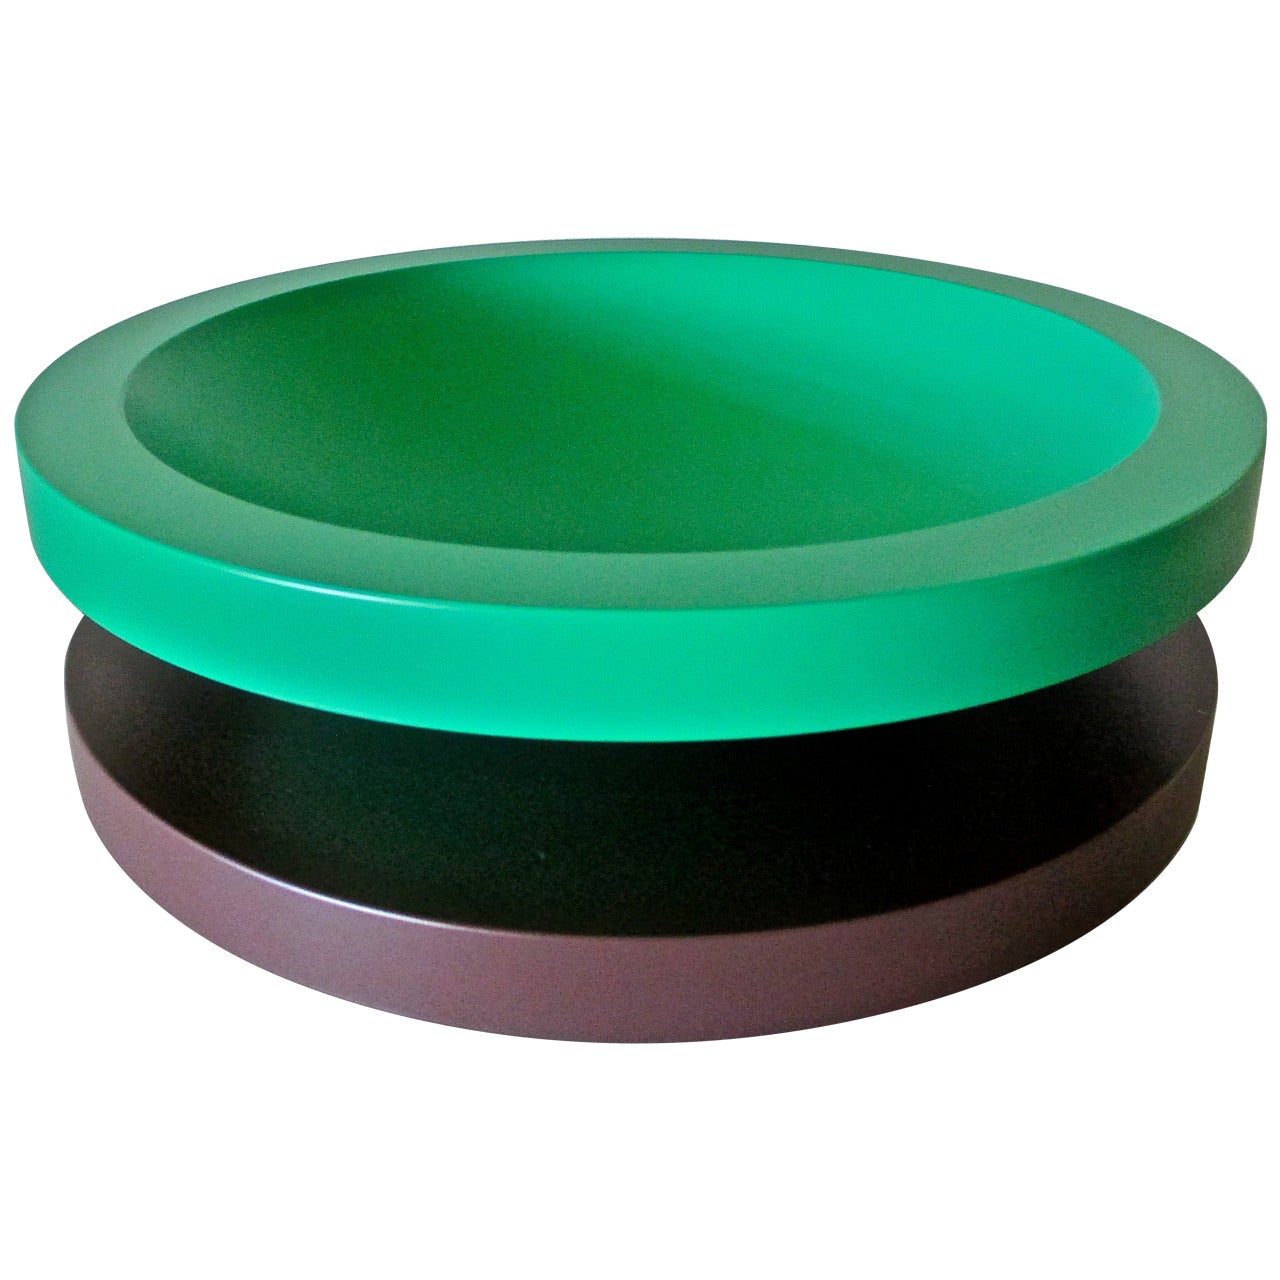 Compote-Basilico Big Bowl by Ettore Sottsass